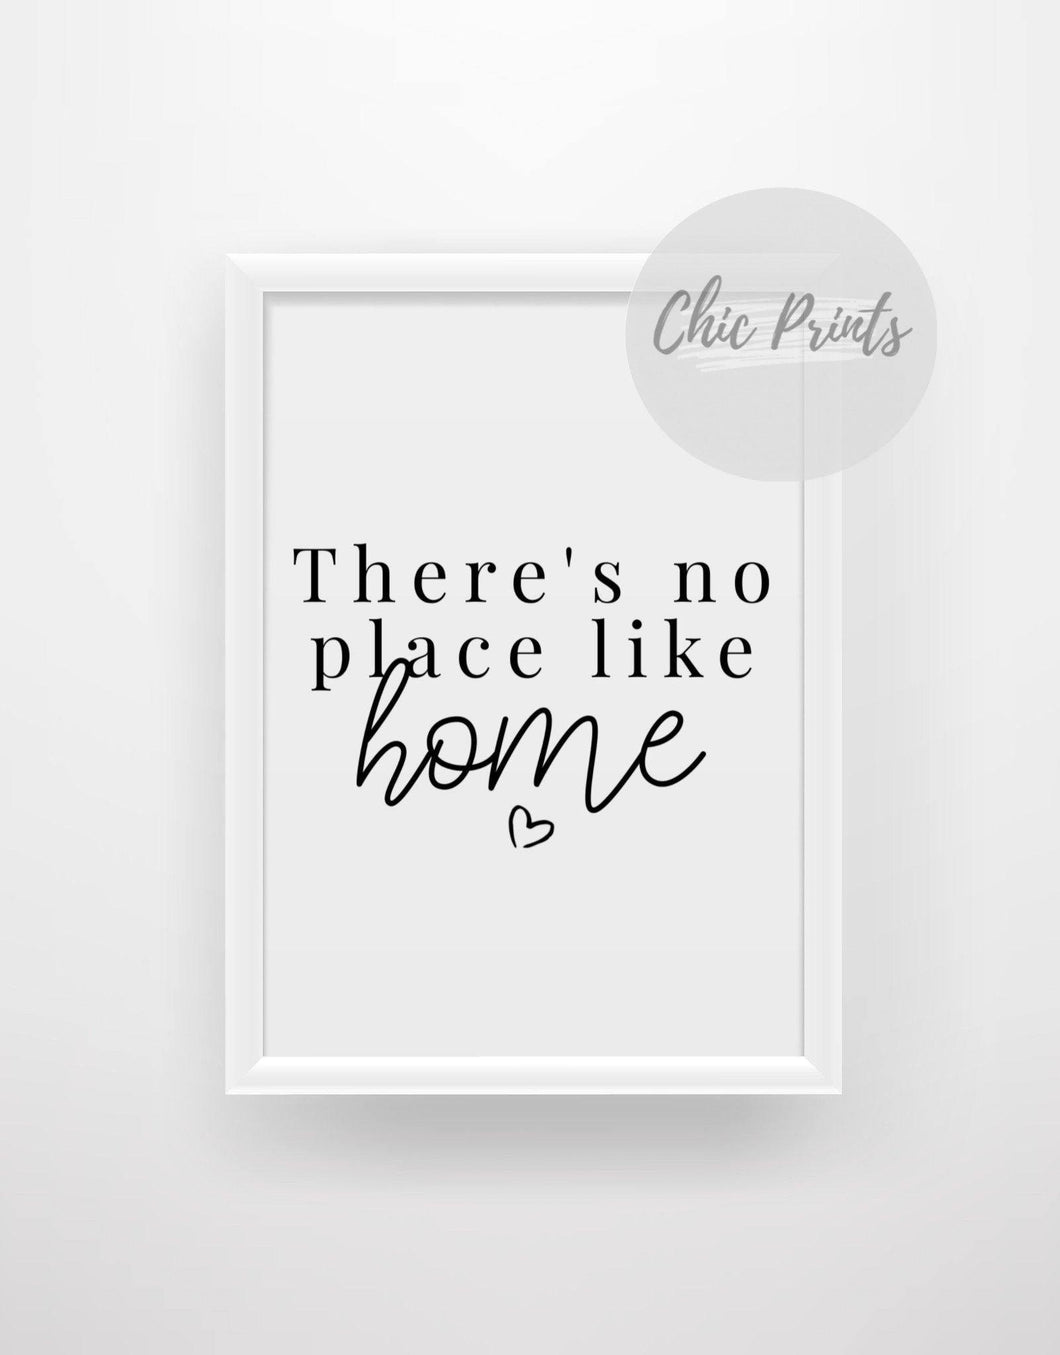 There’s no place like home - Chic Prints